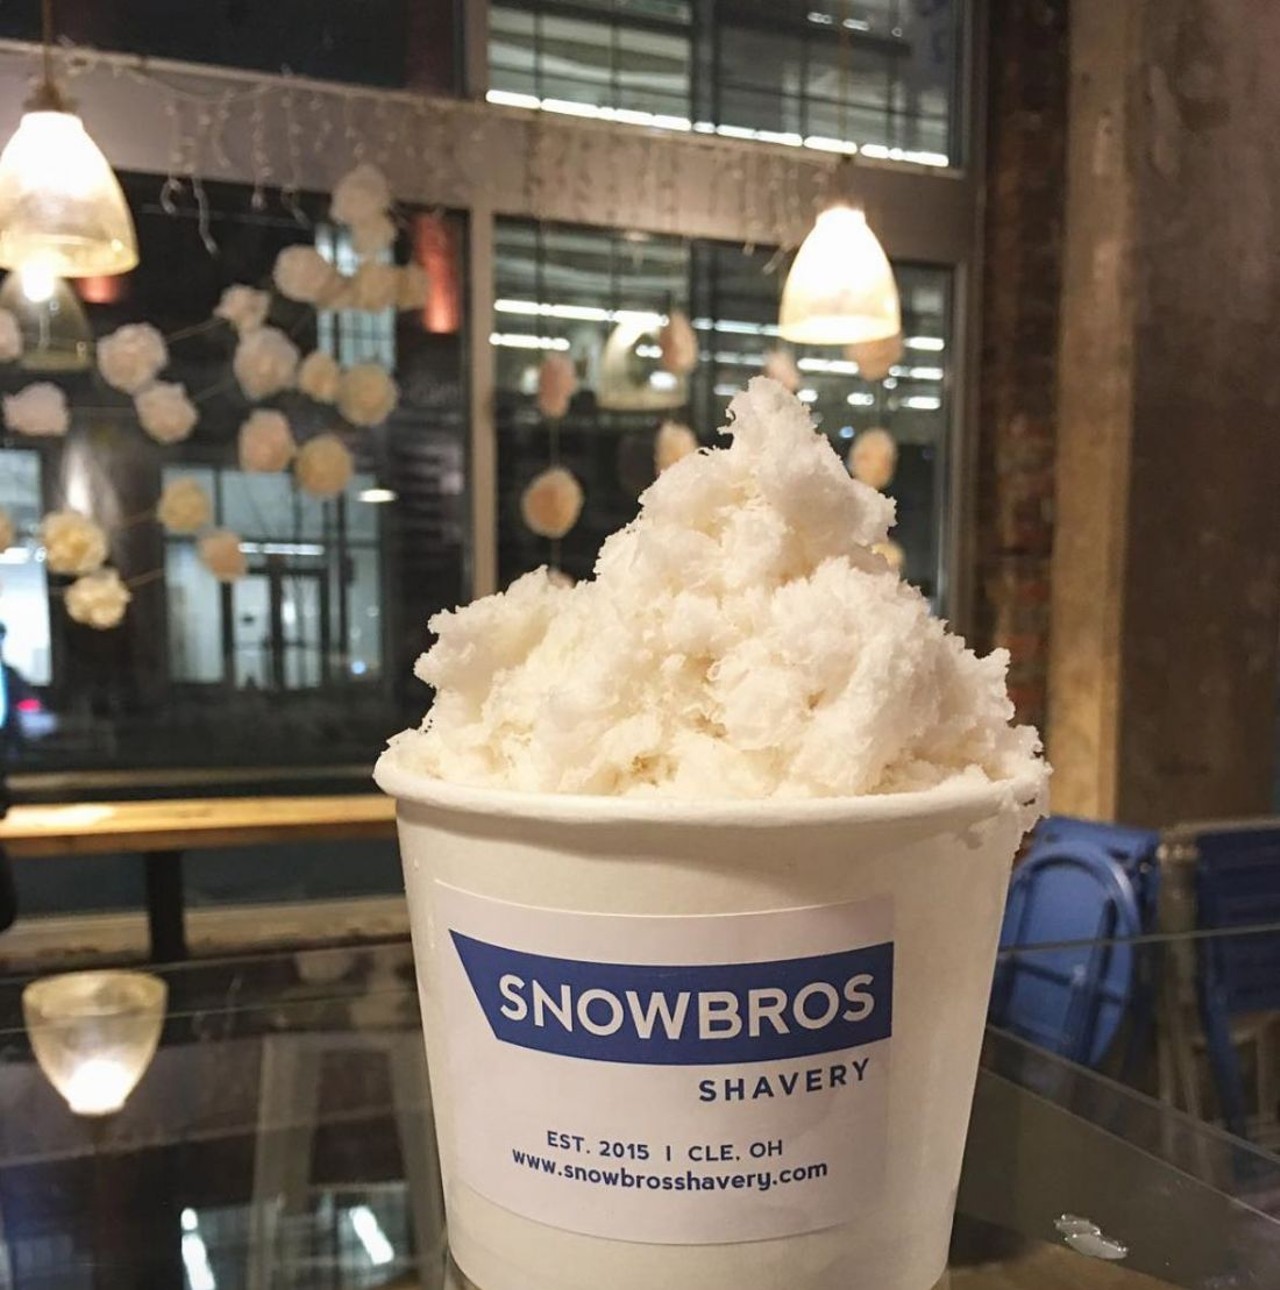  SnowBros Shavery
SnowBros Shavery combines shaved ice and ice cream for and original and delicious sweet treat. This food truck appears at several Cleveland festivals, check their website for upcoming locations!
Photo via snowbrosshavery/Instagram